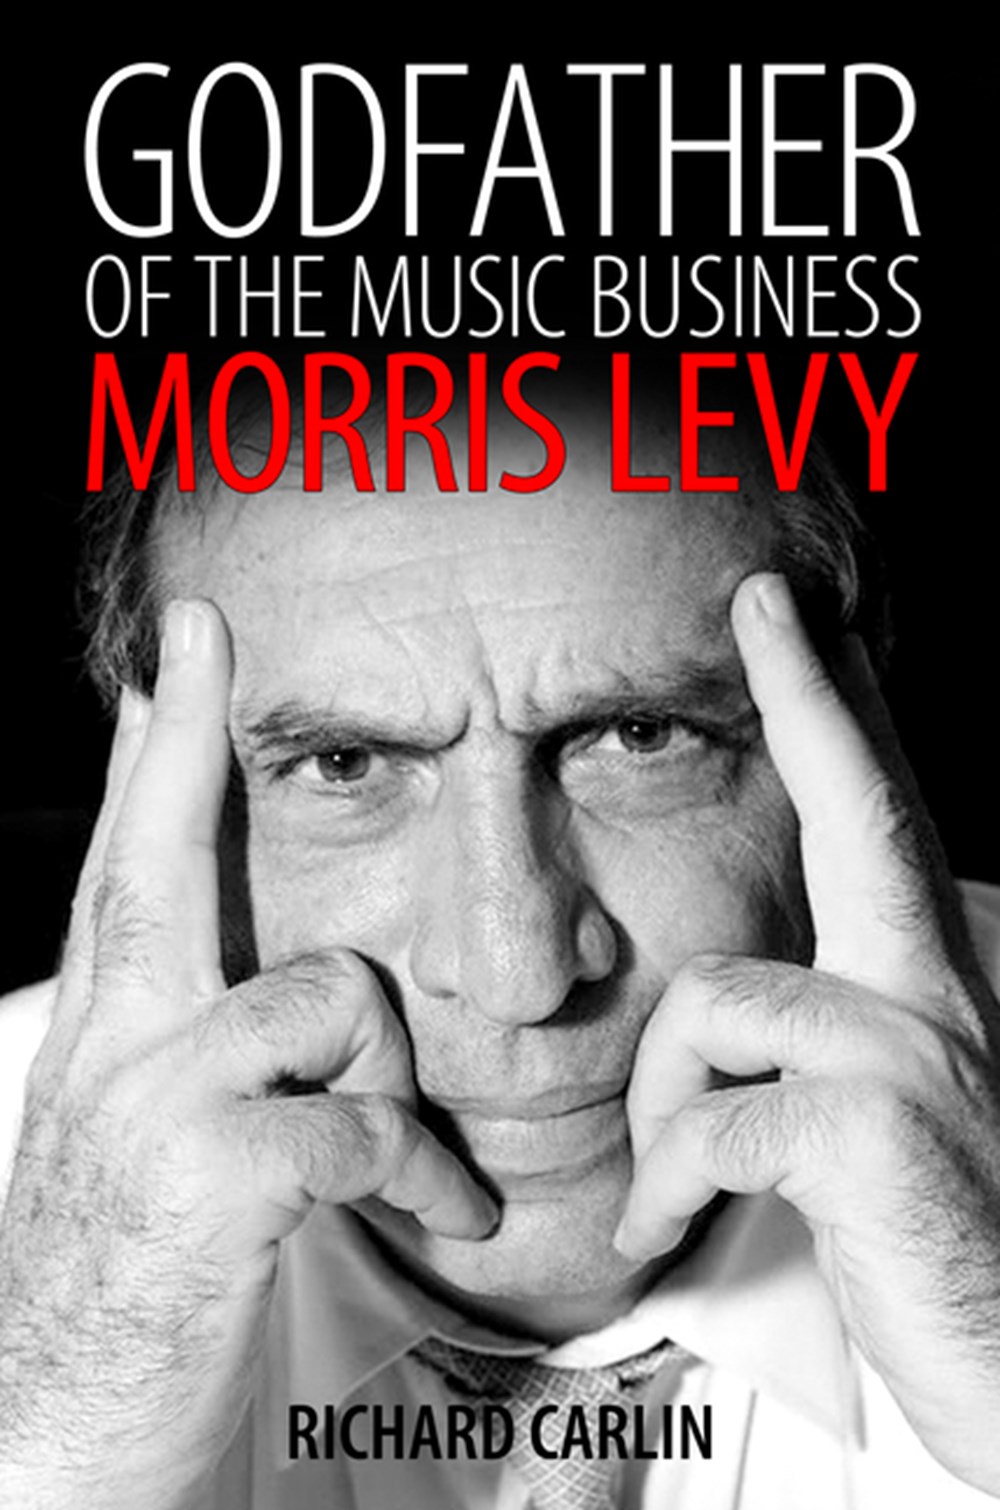 Godfather of the Music Business Morris Levy